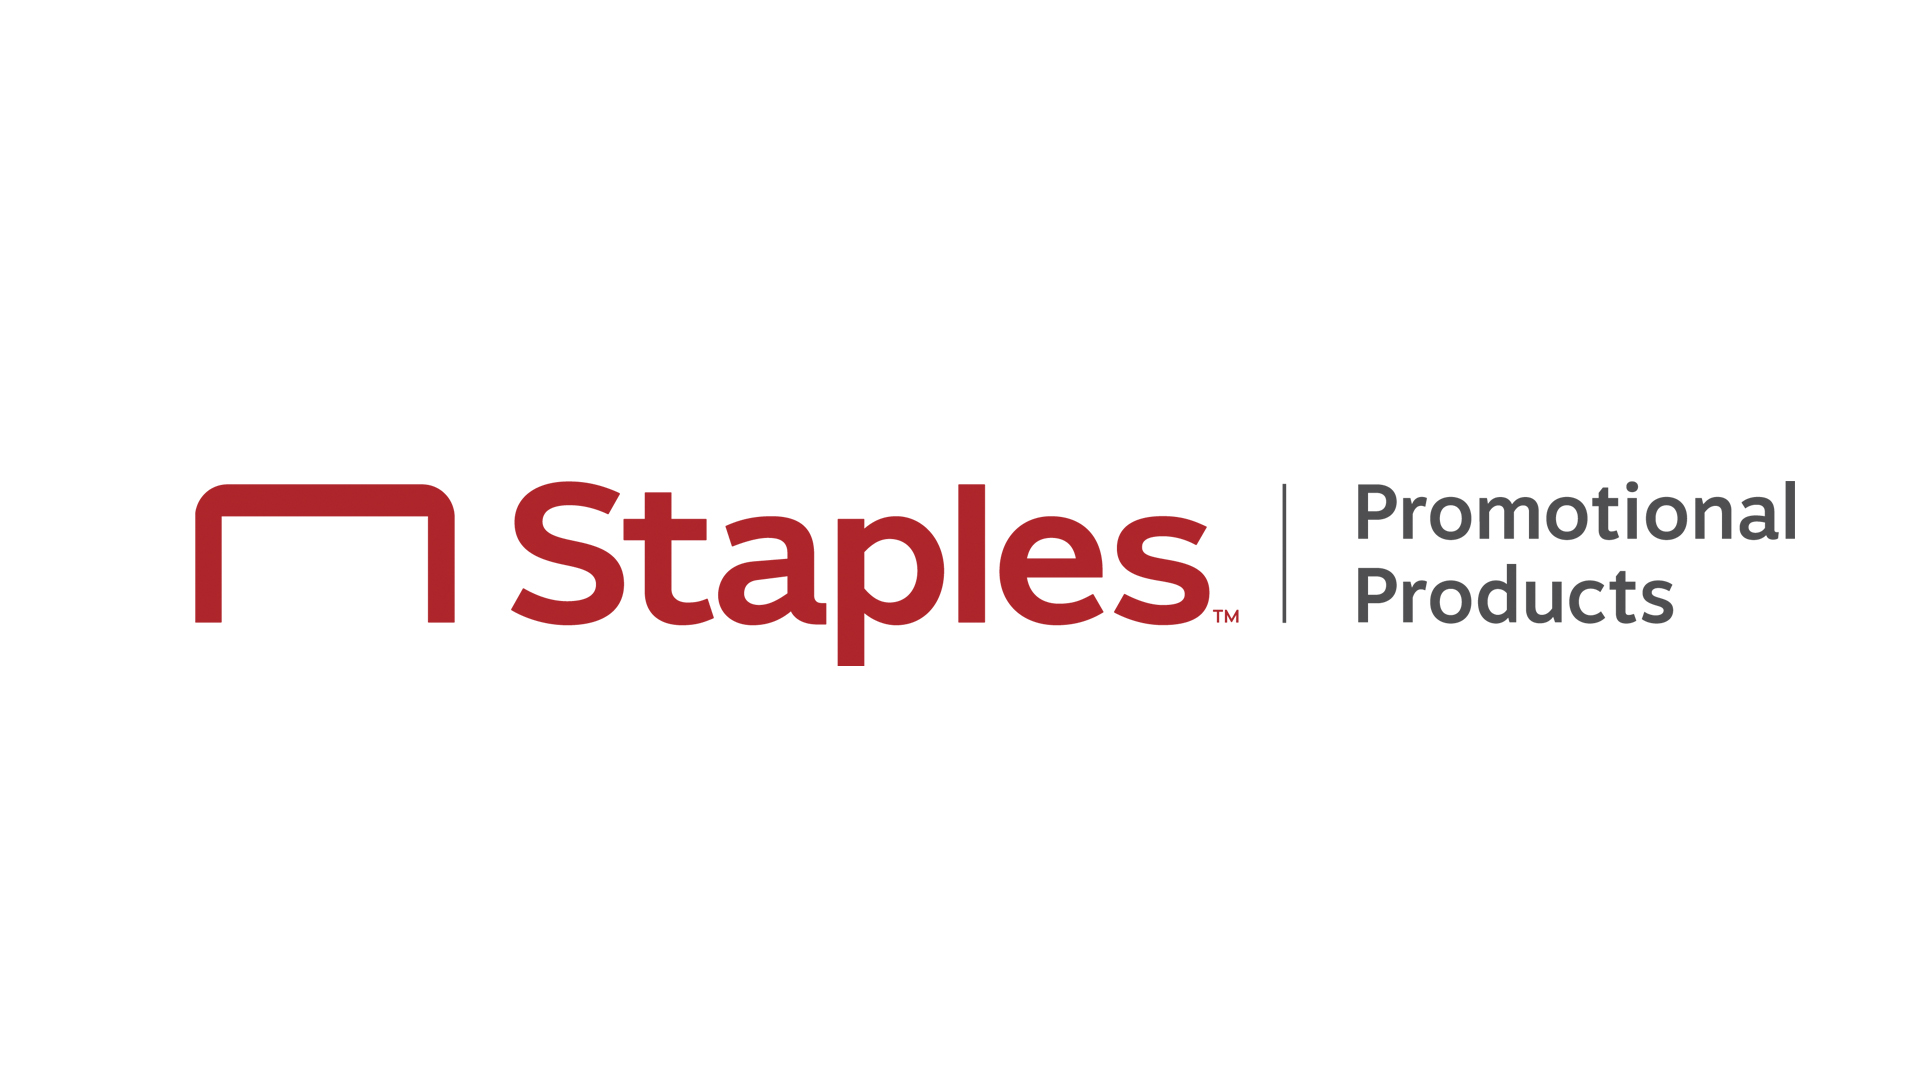 Print and Promotional Products  Staples Professional 